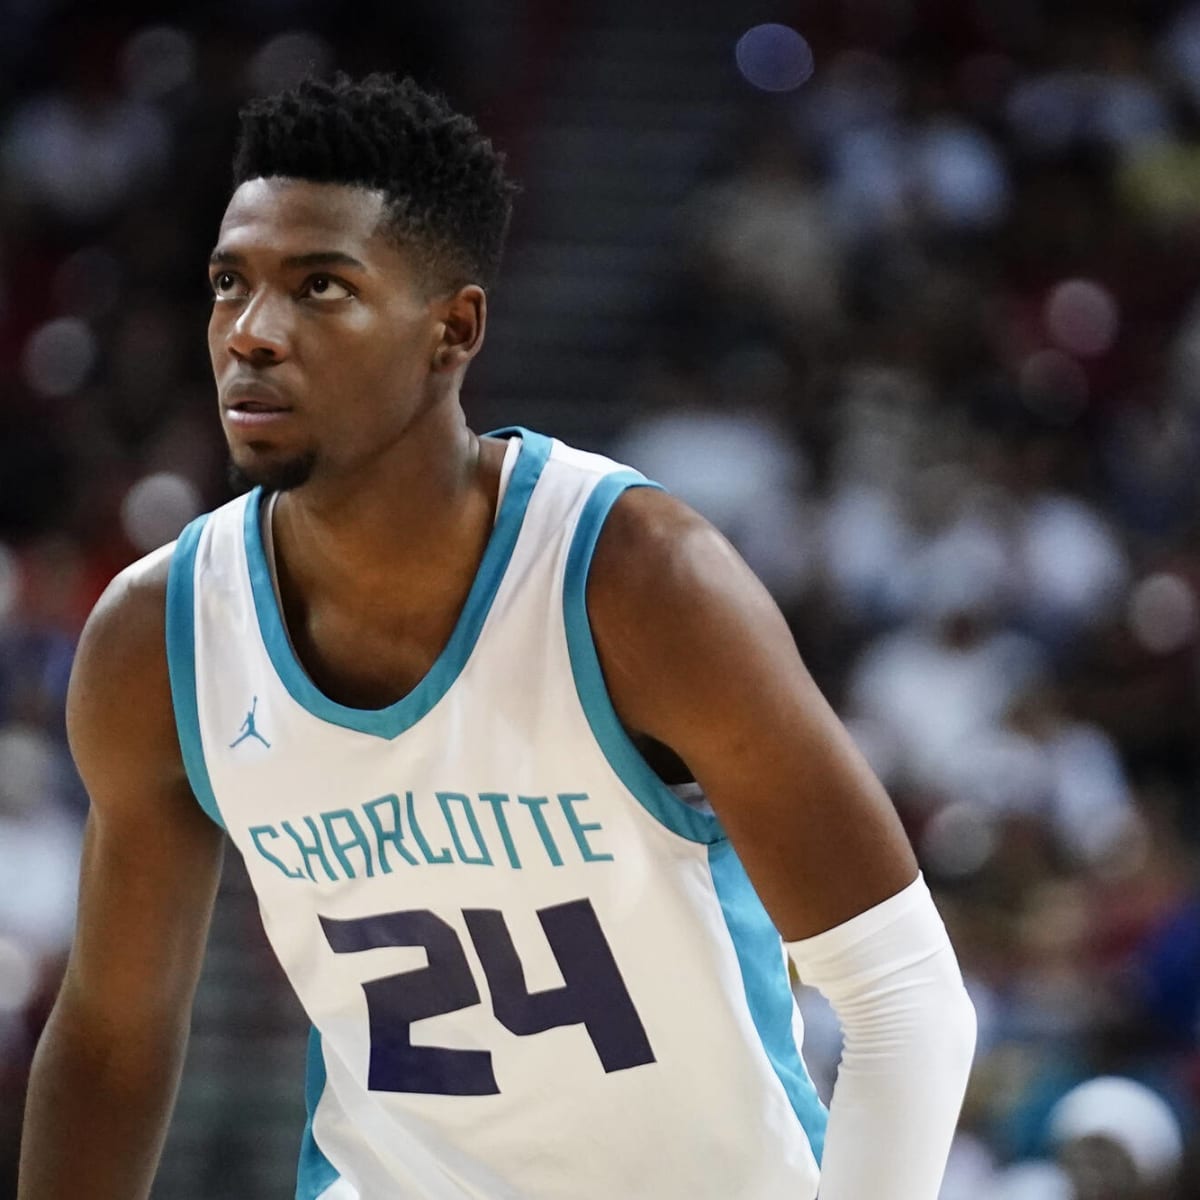 Brandon Miller Hornets jersey: How to buy No. 2 draft pick's jersey